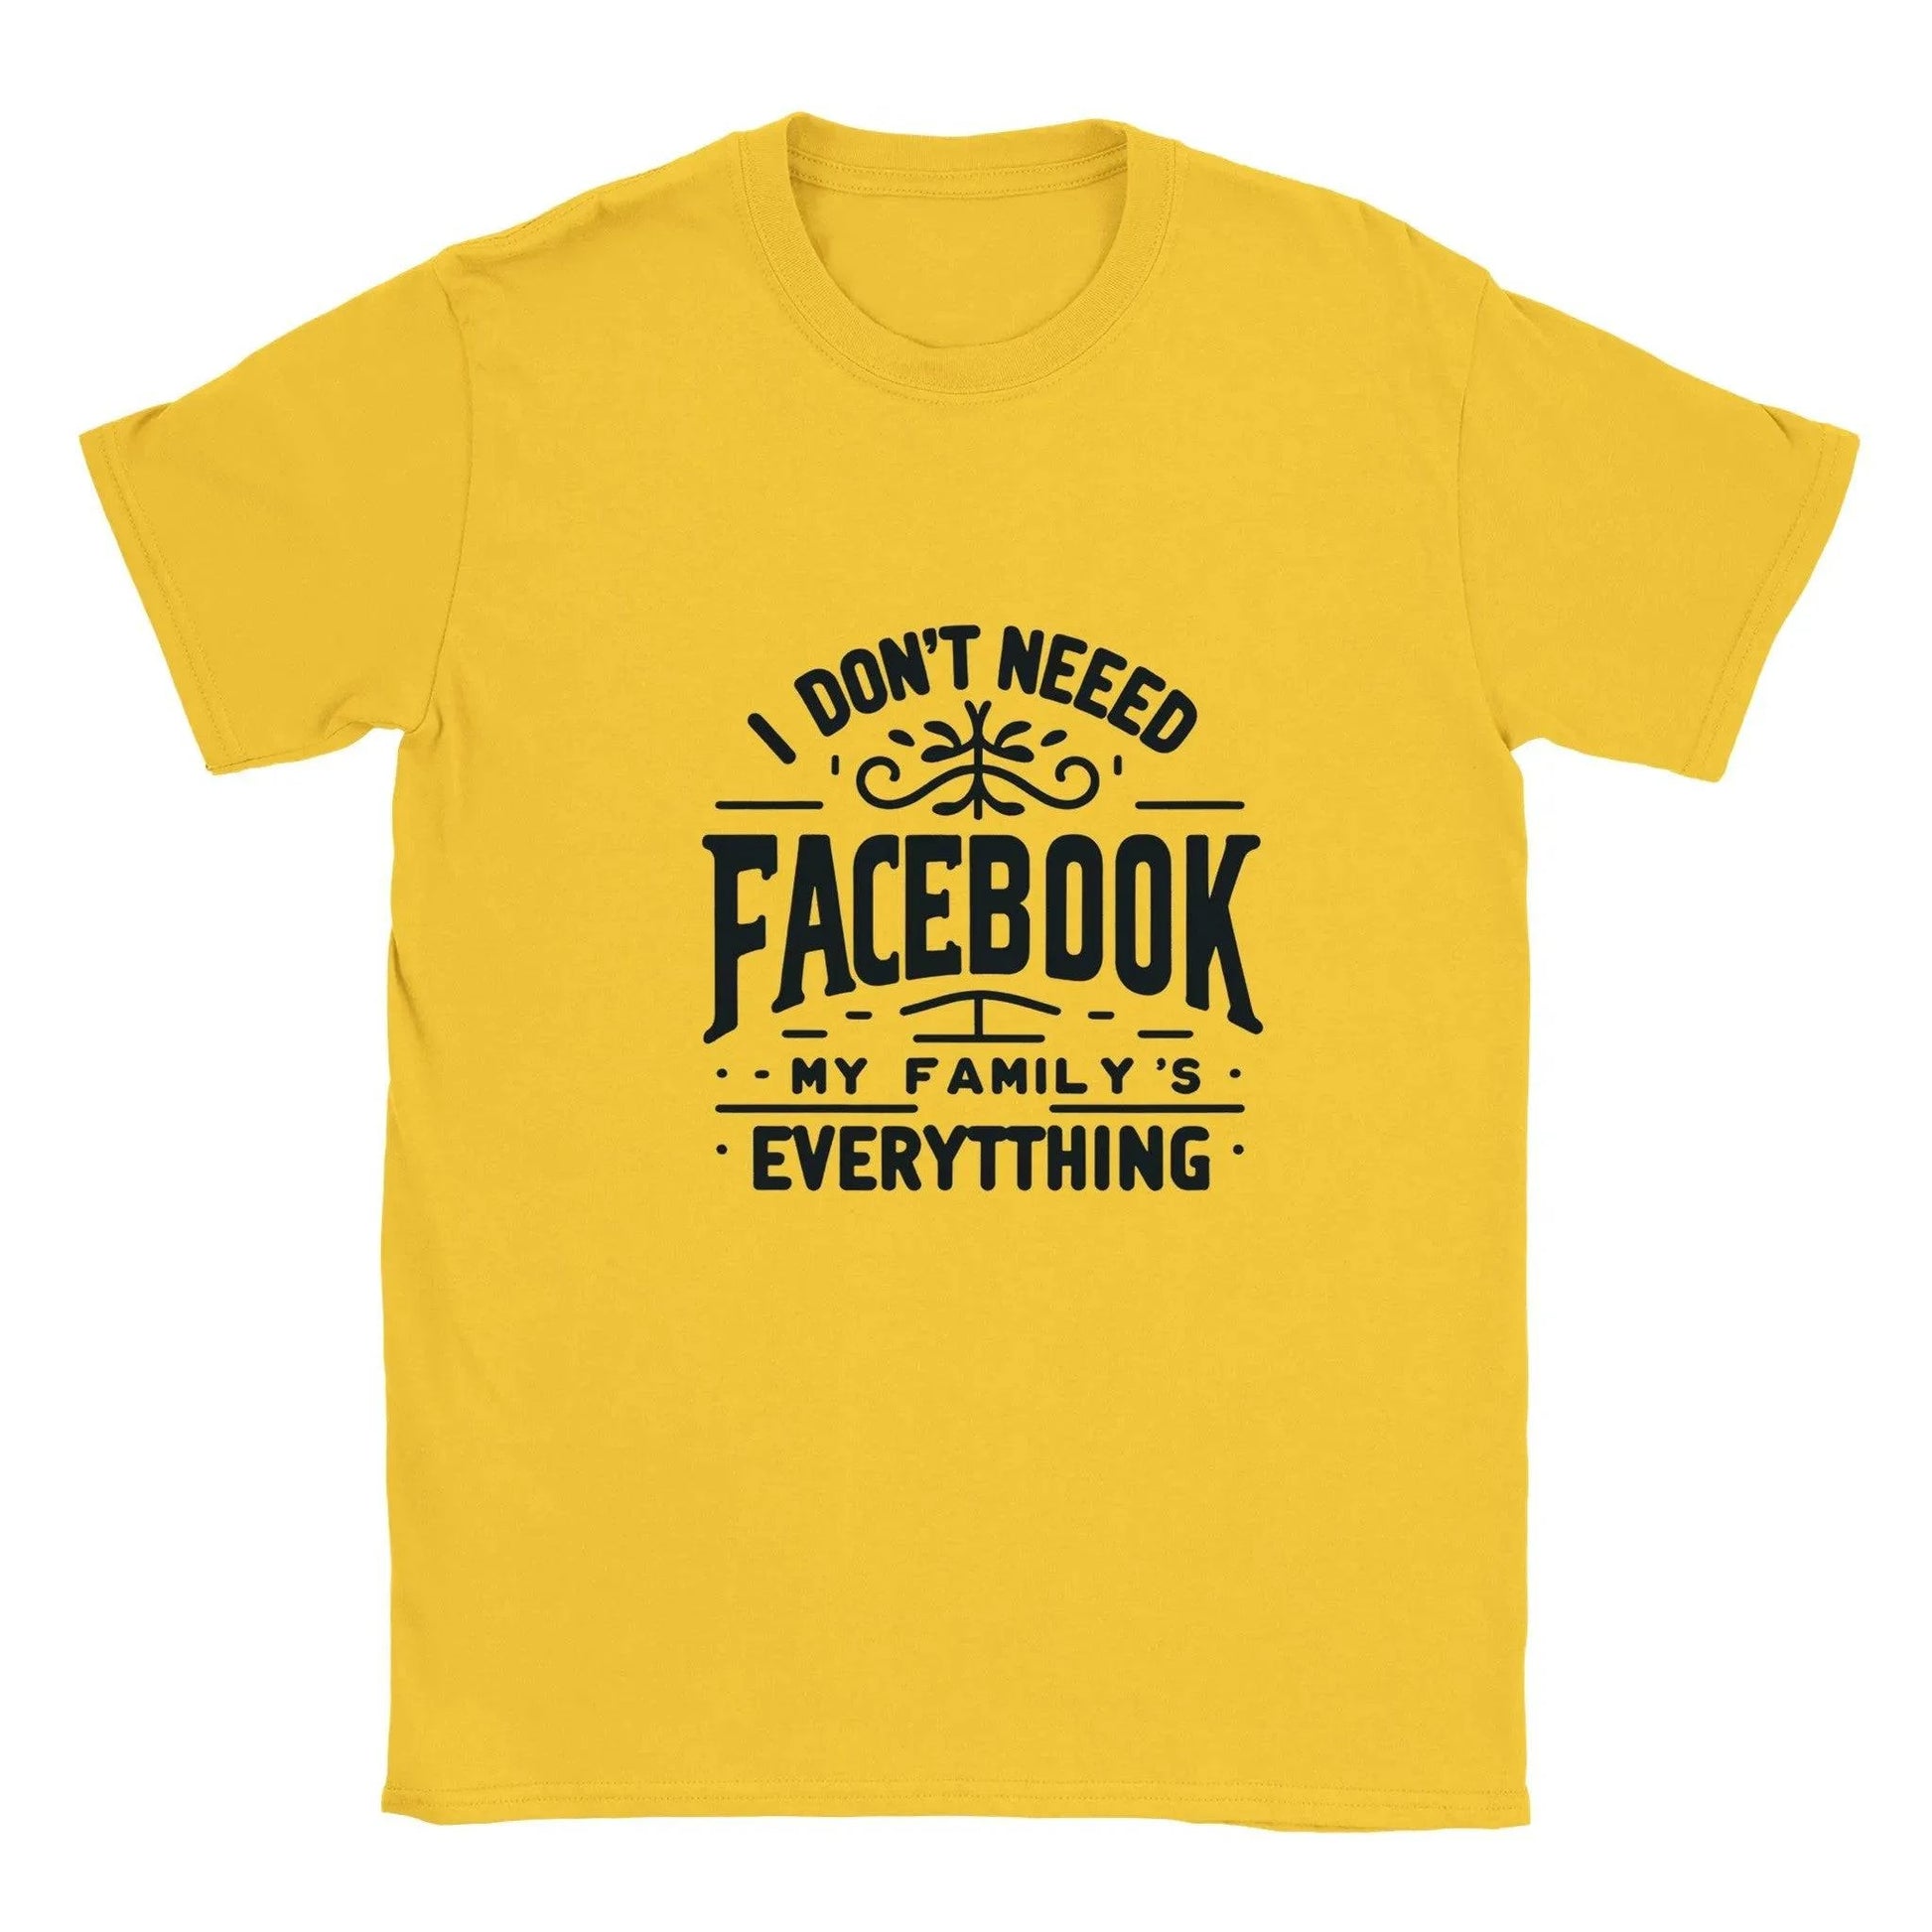 "I Don't Need Facebook, My Family Is Everything," Classic Crewneck "Beyond Social Media" Family T-Shirt - 100% soft, breathable cotton - BeinCart